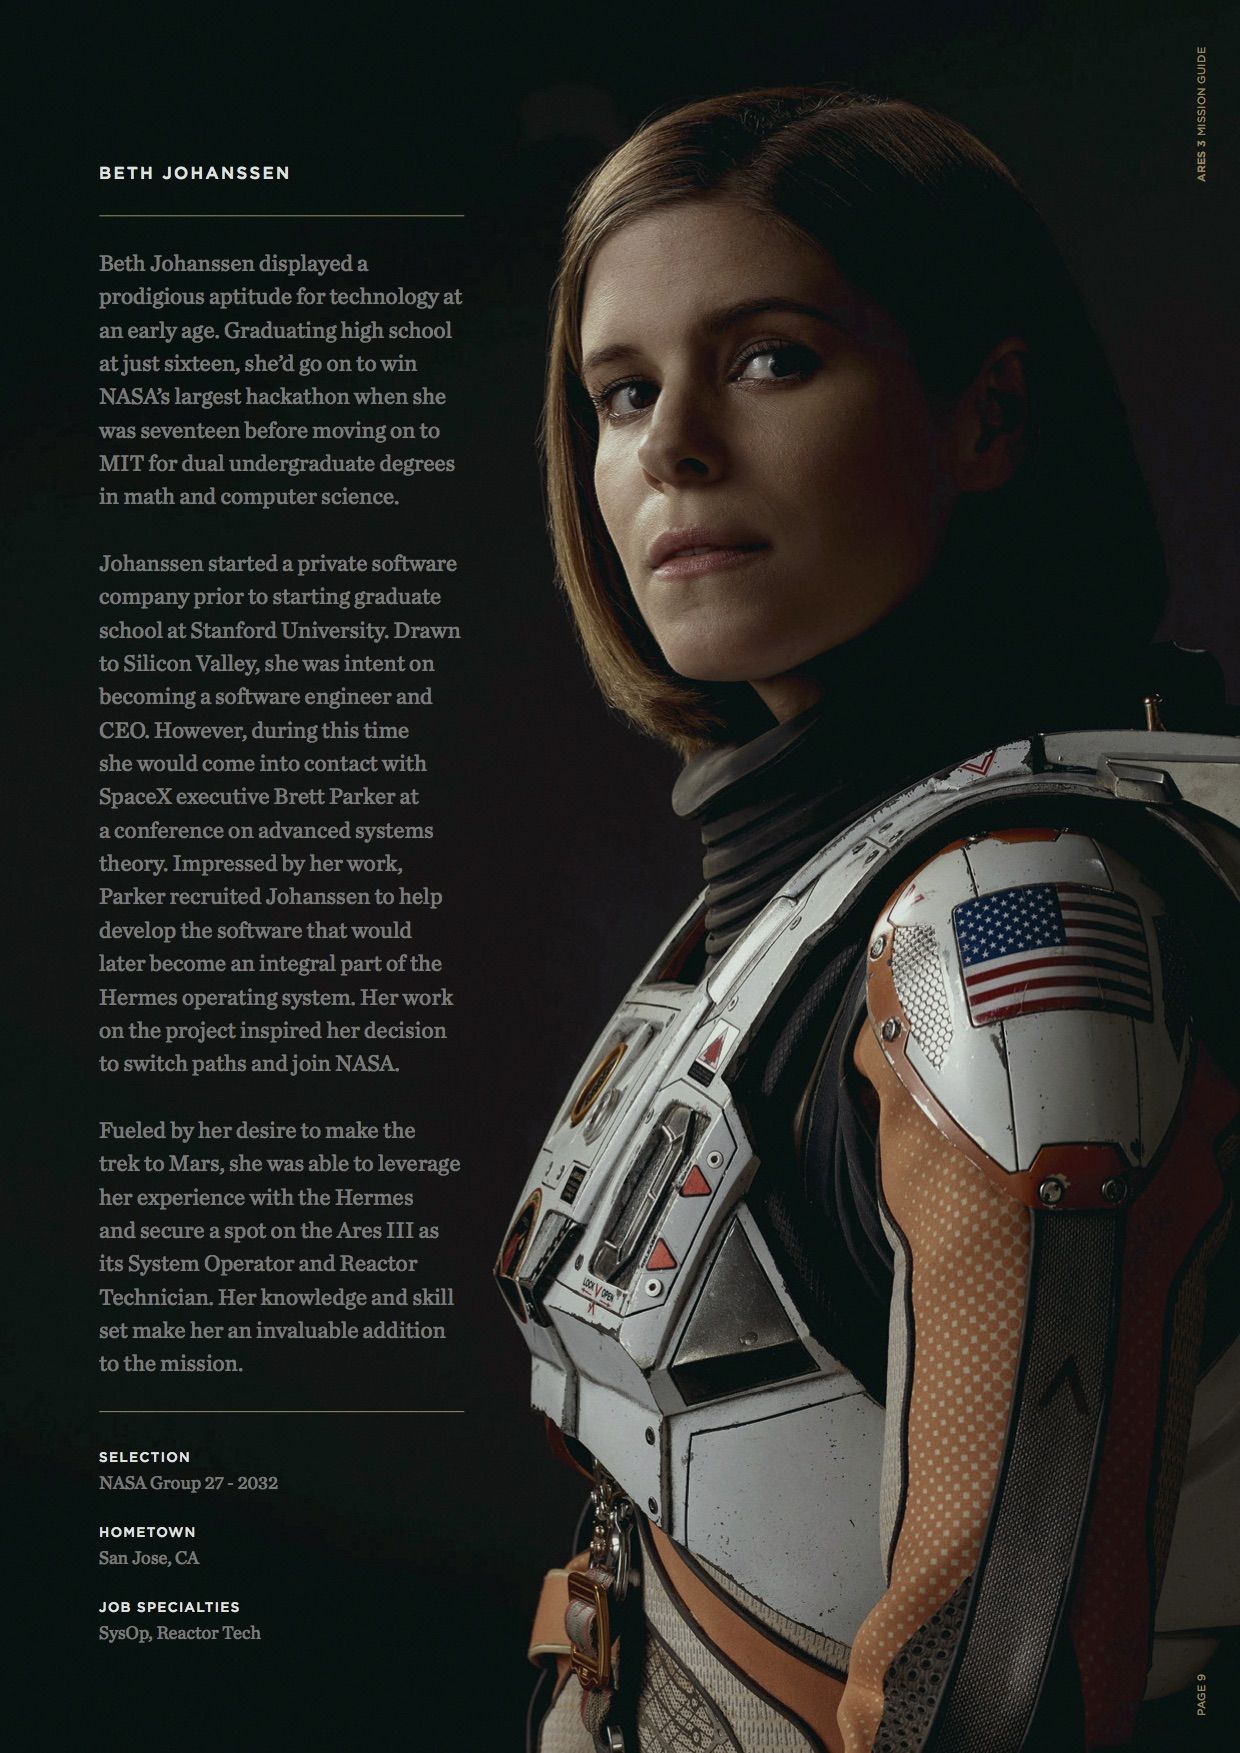 The Martian Mission Guide Biography Beth Johanssen